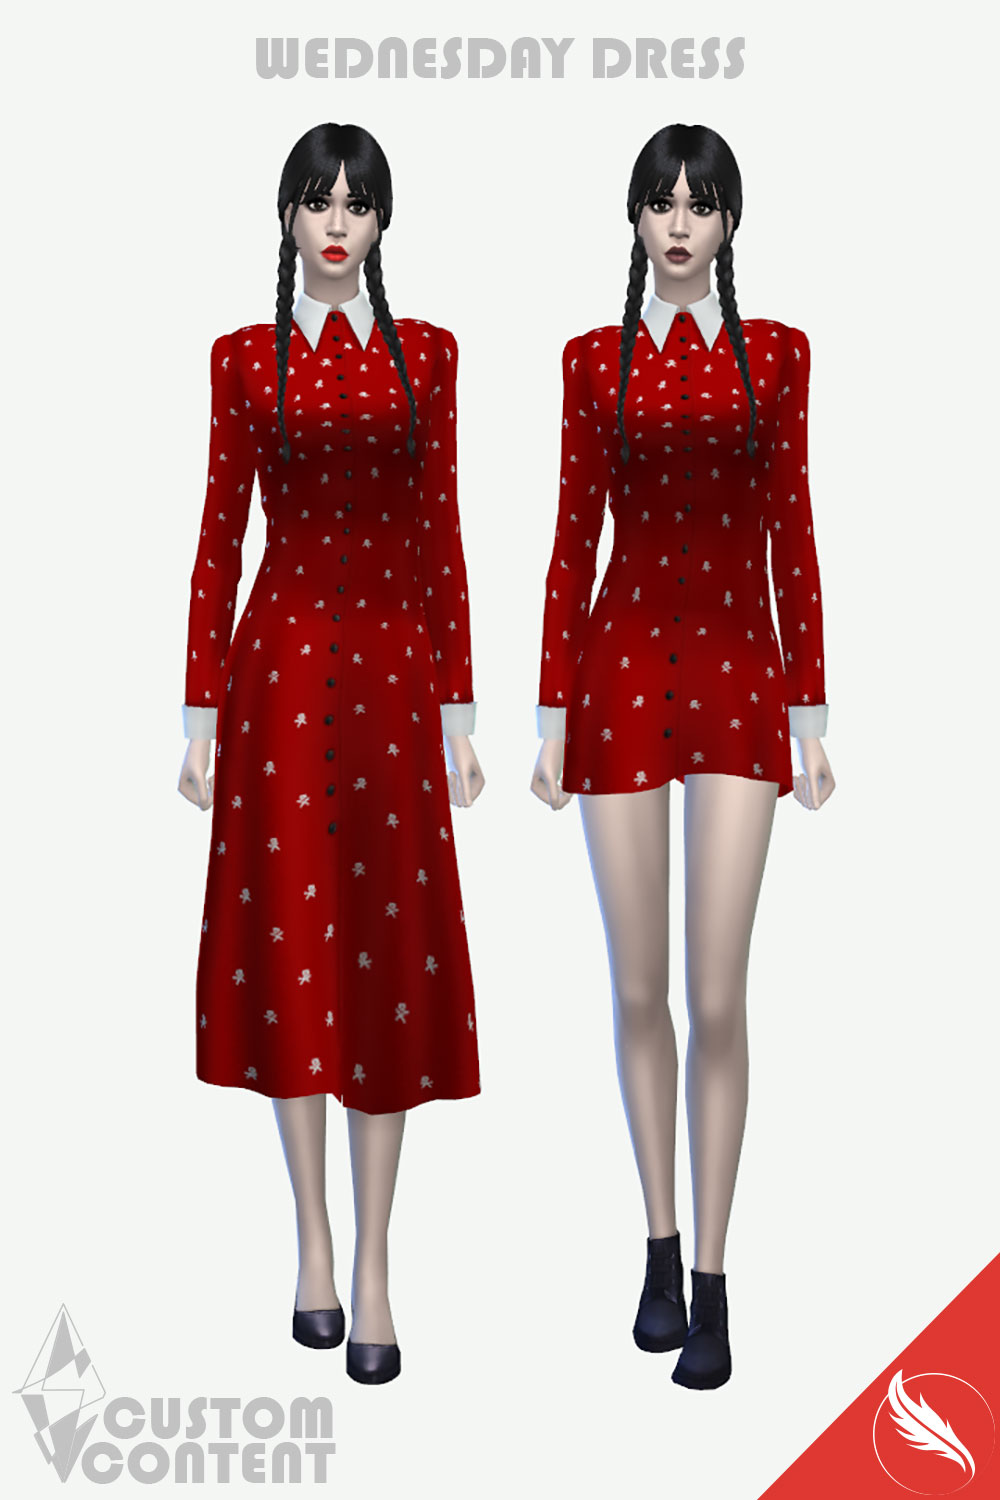 The Sims 4 Wednesday Dress Custom Content